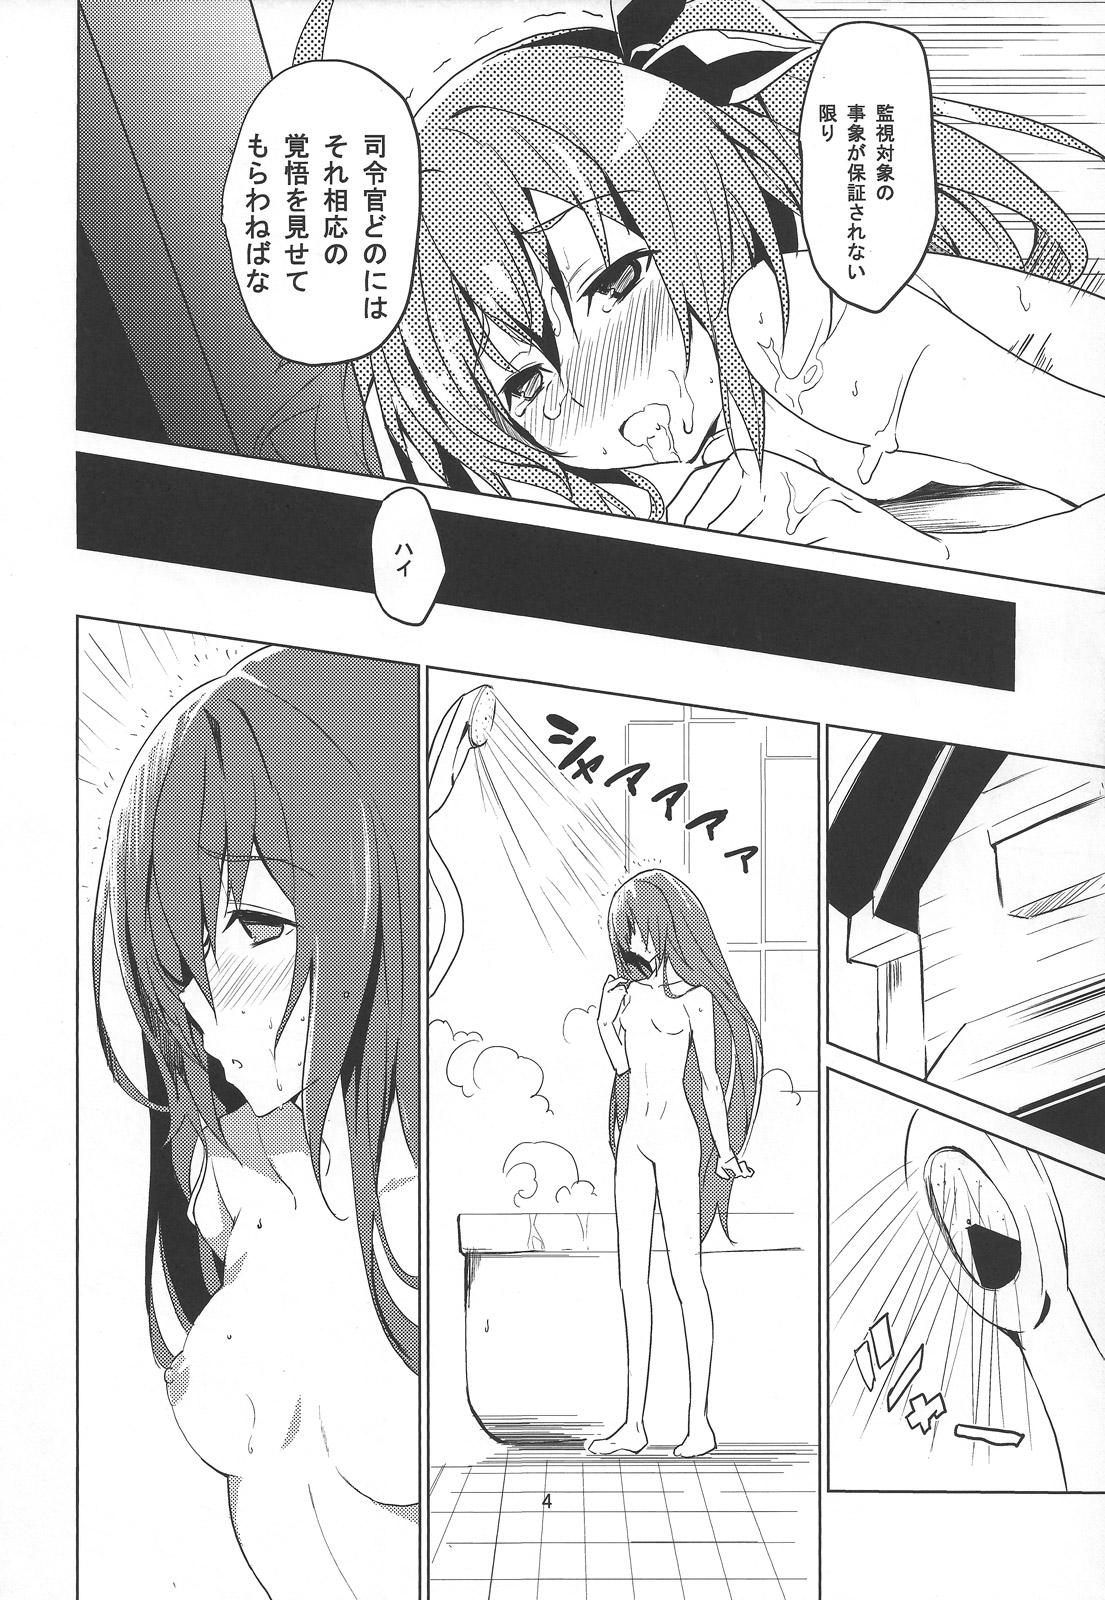 She hollie - Date a live Dominicana - Page 5